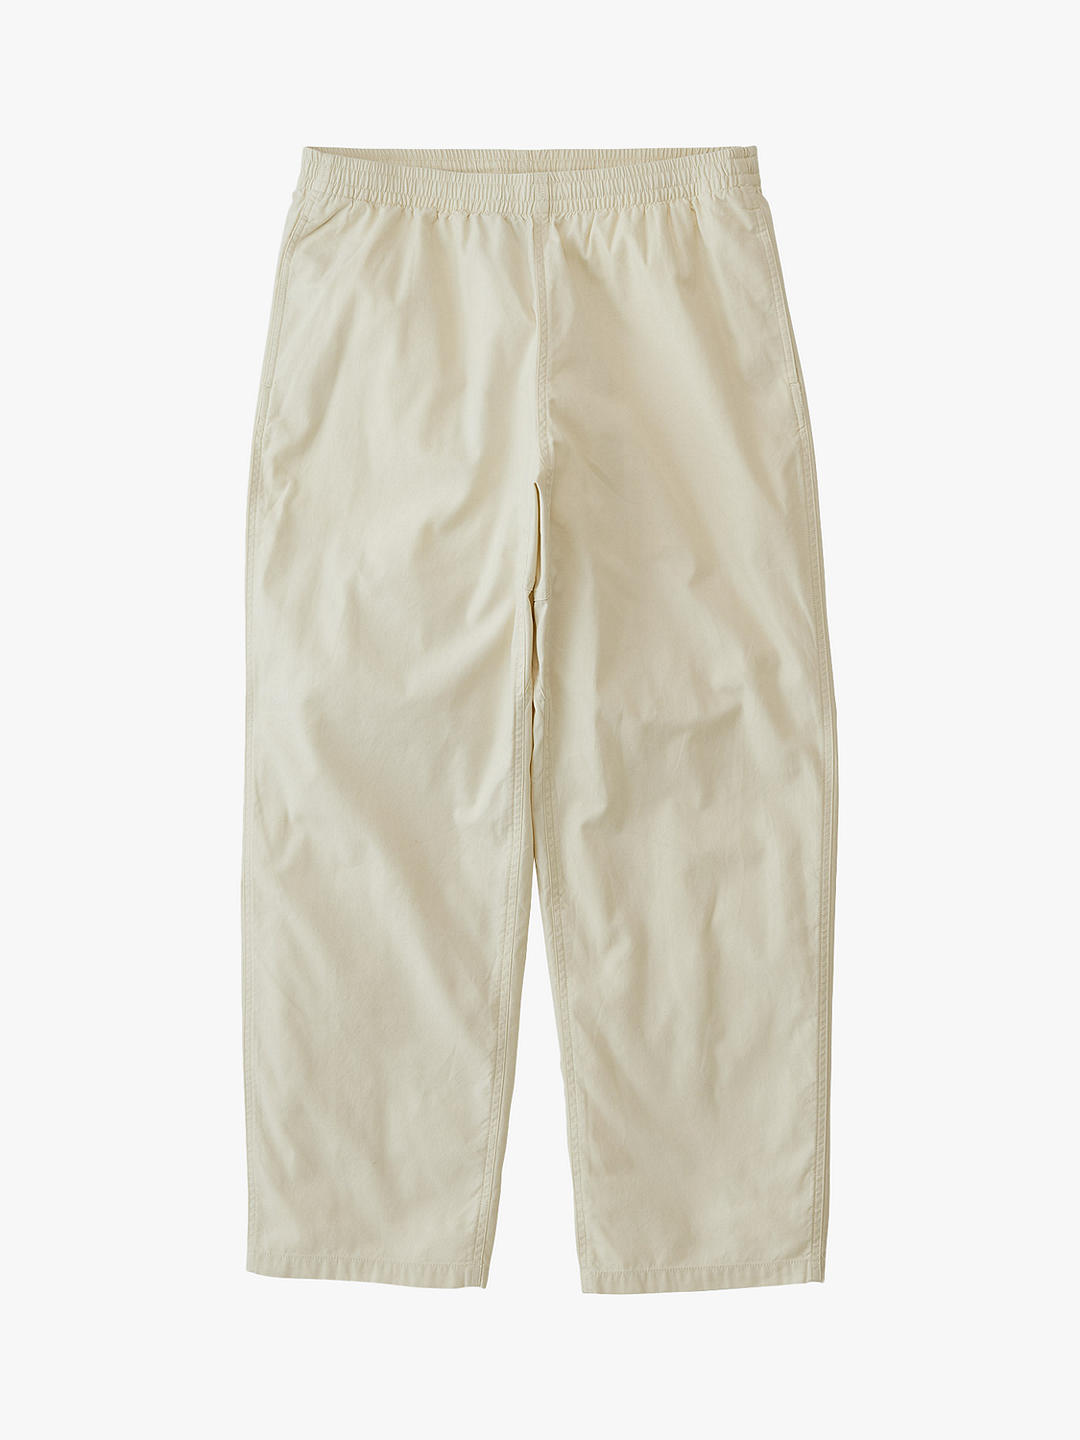 Gramicci Swell Brushed Cotton Trousers, Sand